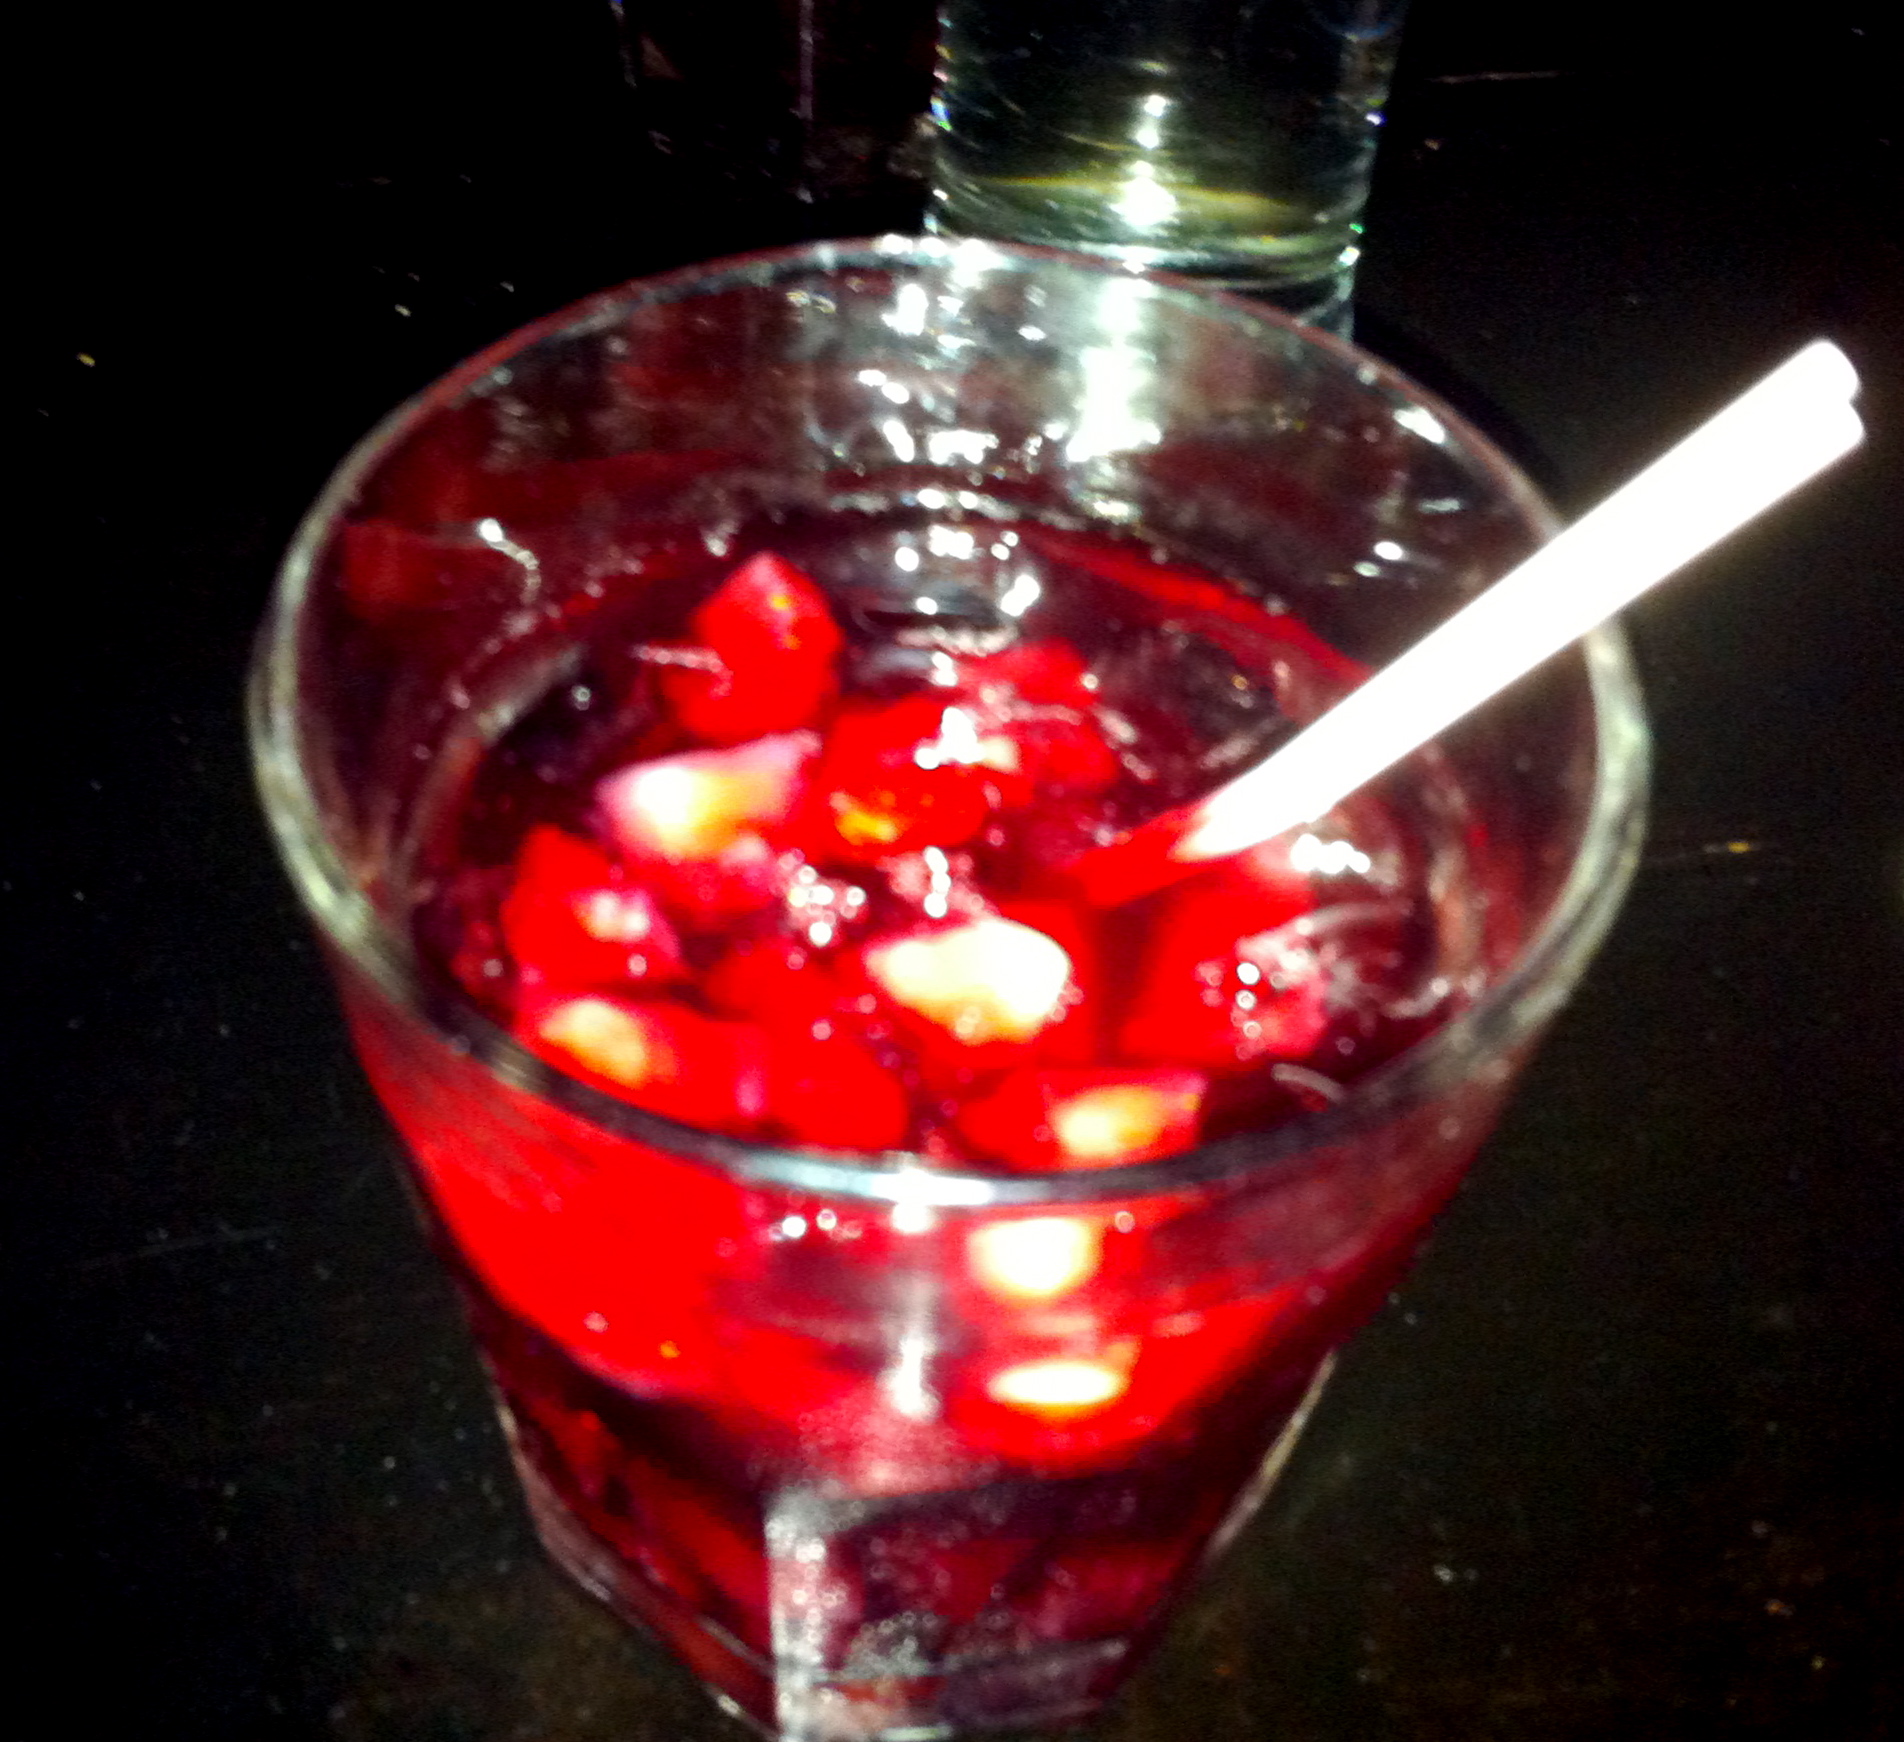 This strawberry sangria was delicious from Mesa Coyoacan!